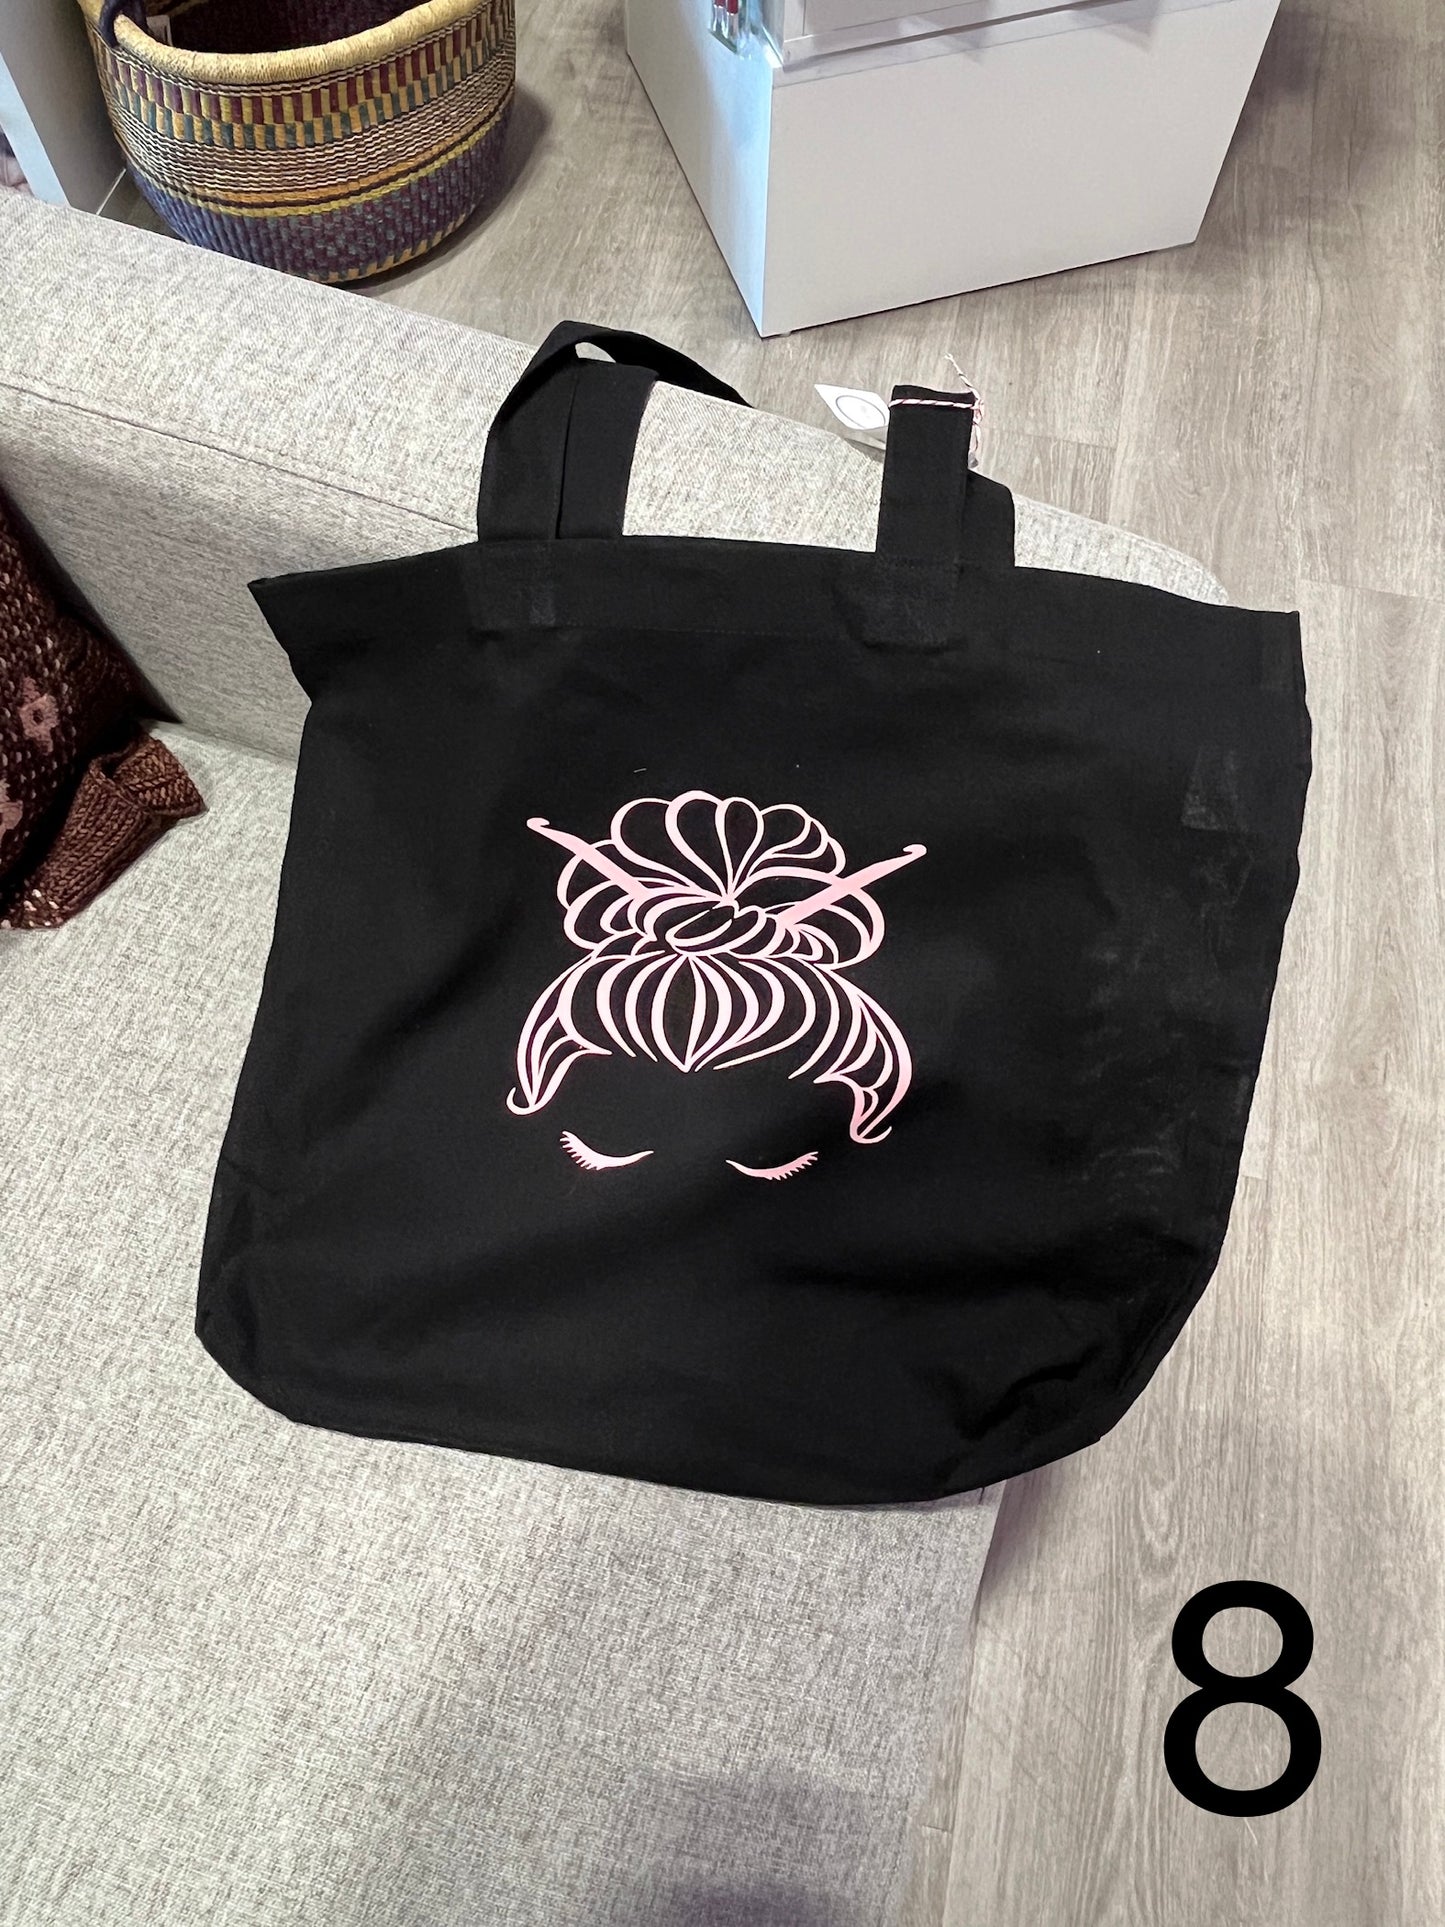 Aly & Co. Tote Bags